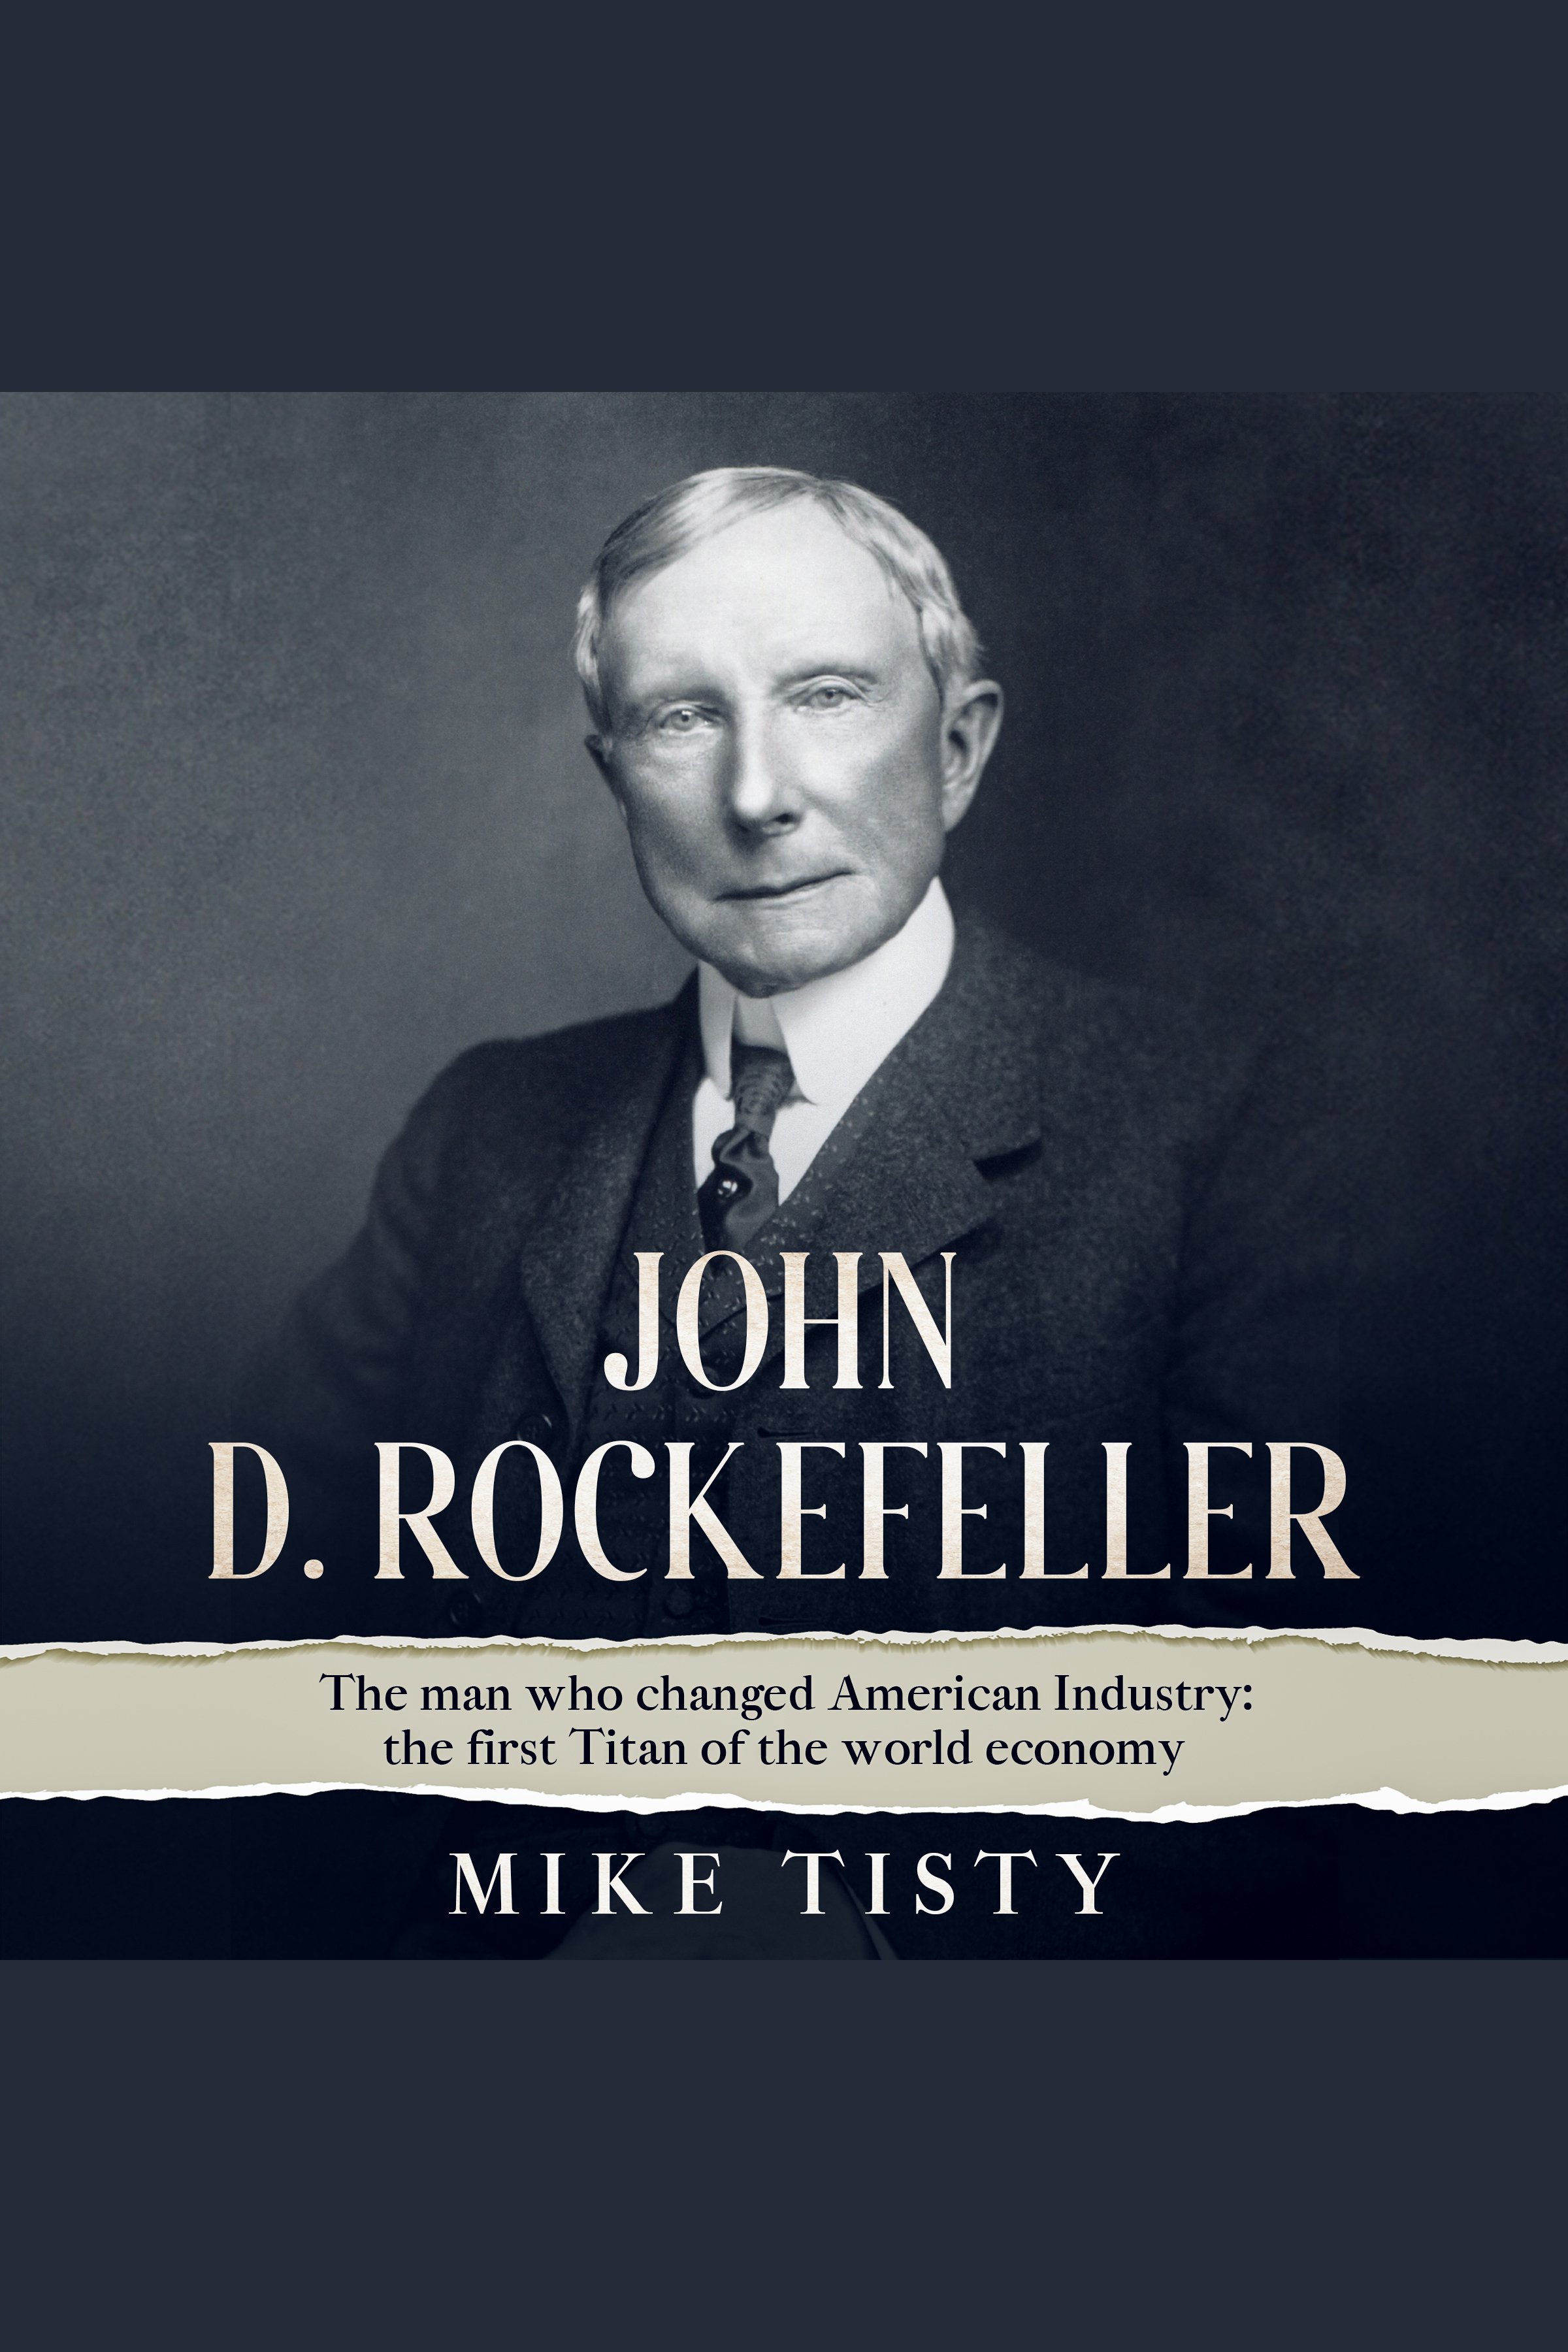 John D. Rockefeller The man who changed American Industry: the first Titan of the world economy cover image